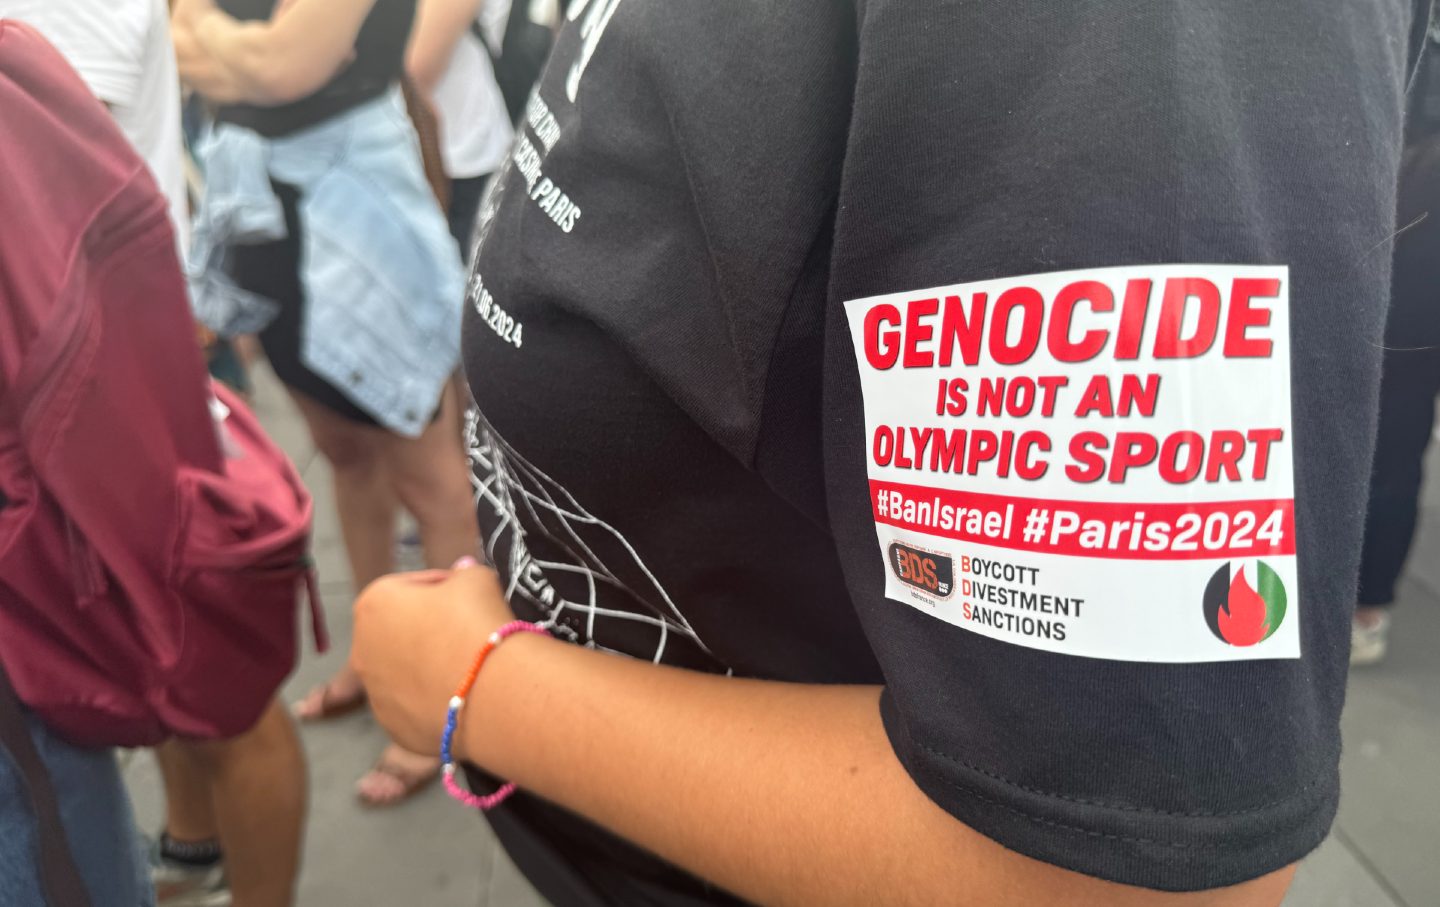 A protester at the Counter-Opening of the Olympics event in Paris on July 25, 2024.